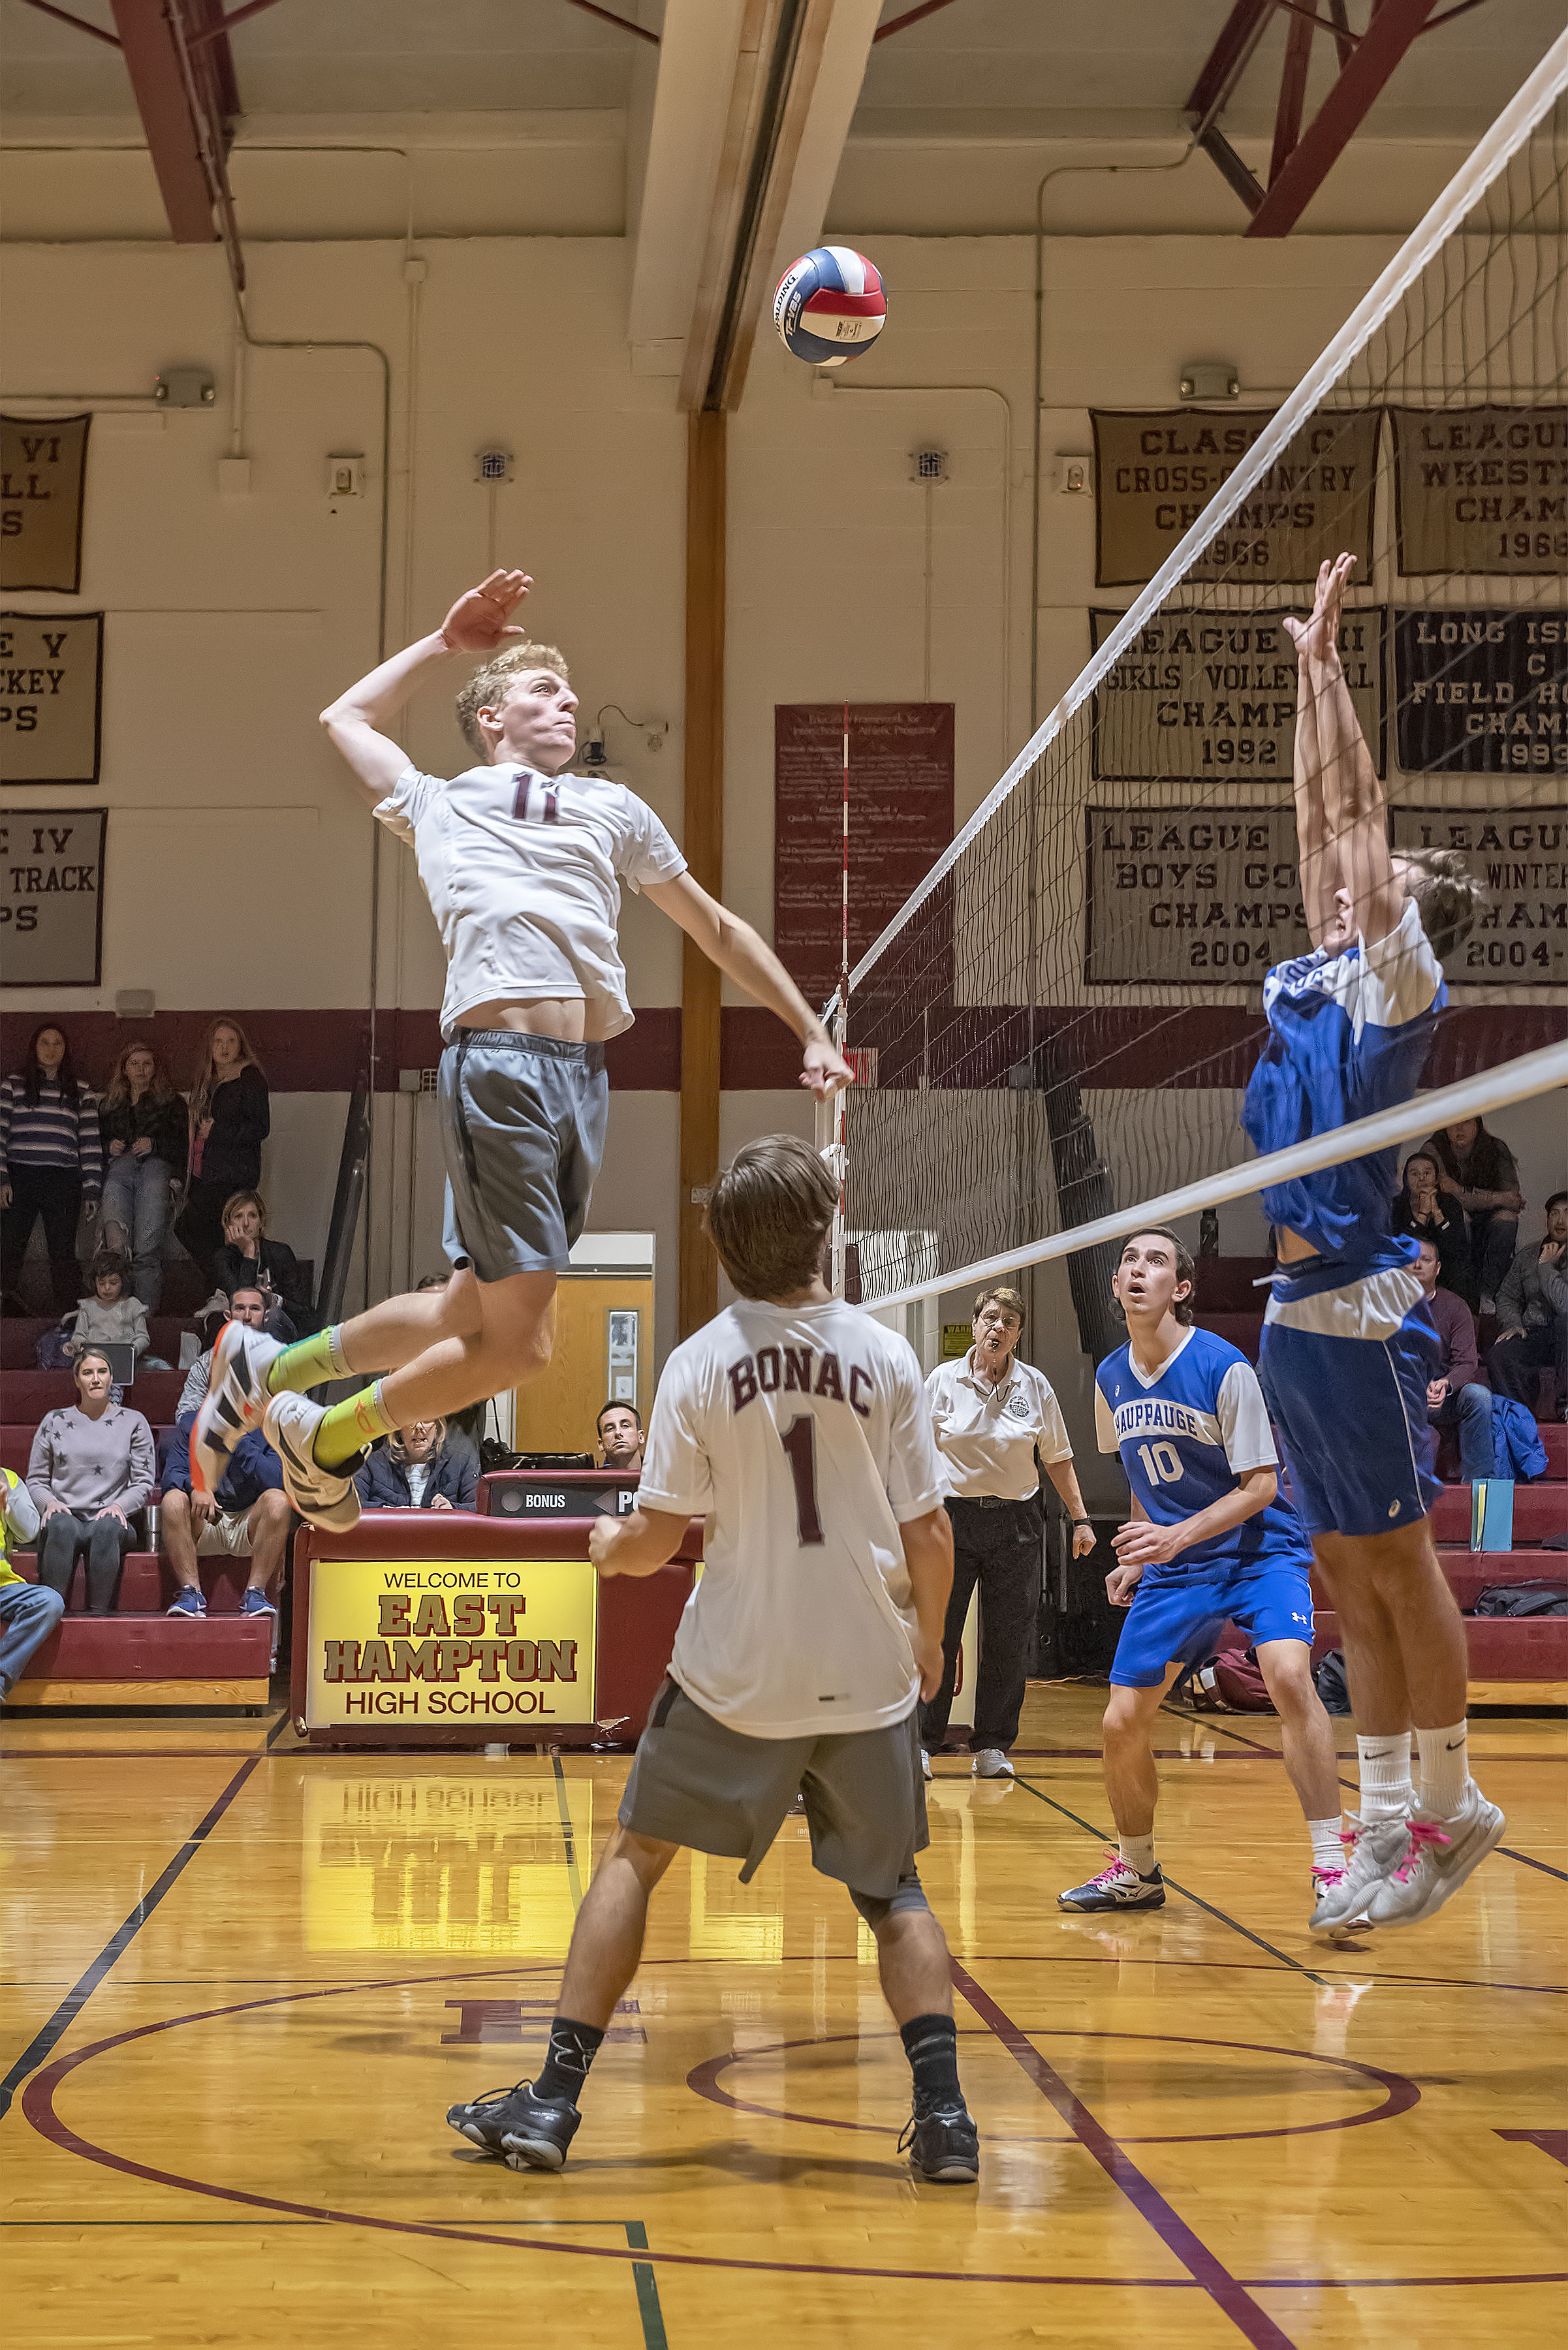 Senior Clark Miller paced the Bonackers on Friday but it wasn't enough in the tough five-set loss.